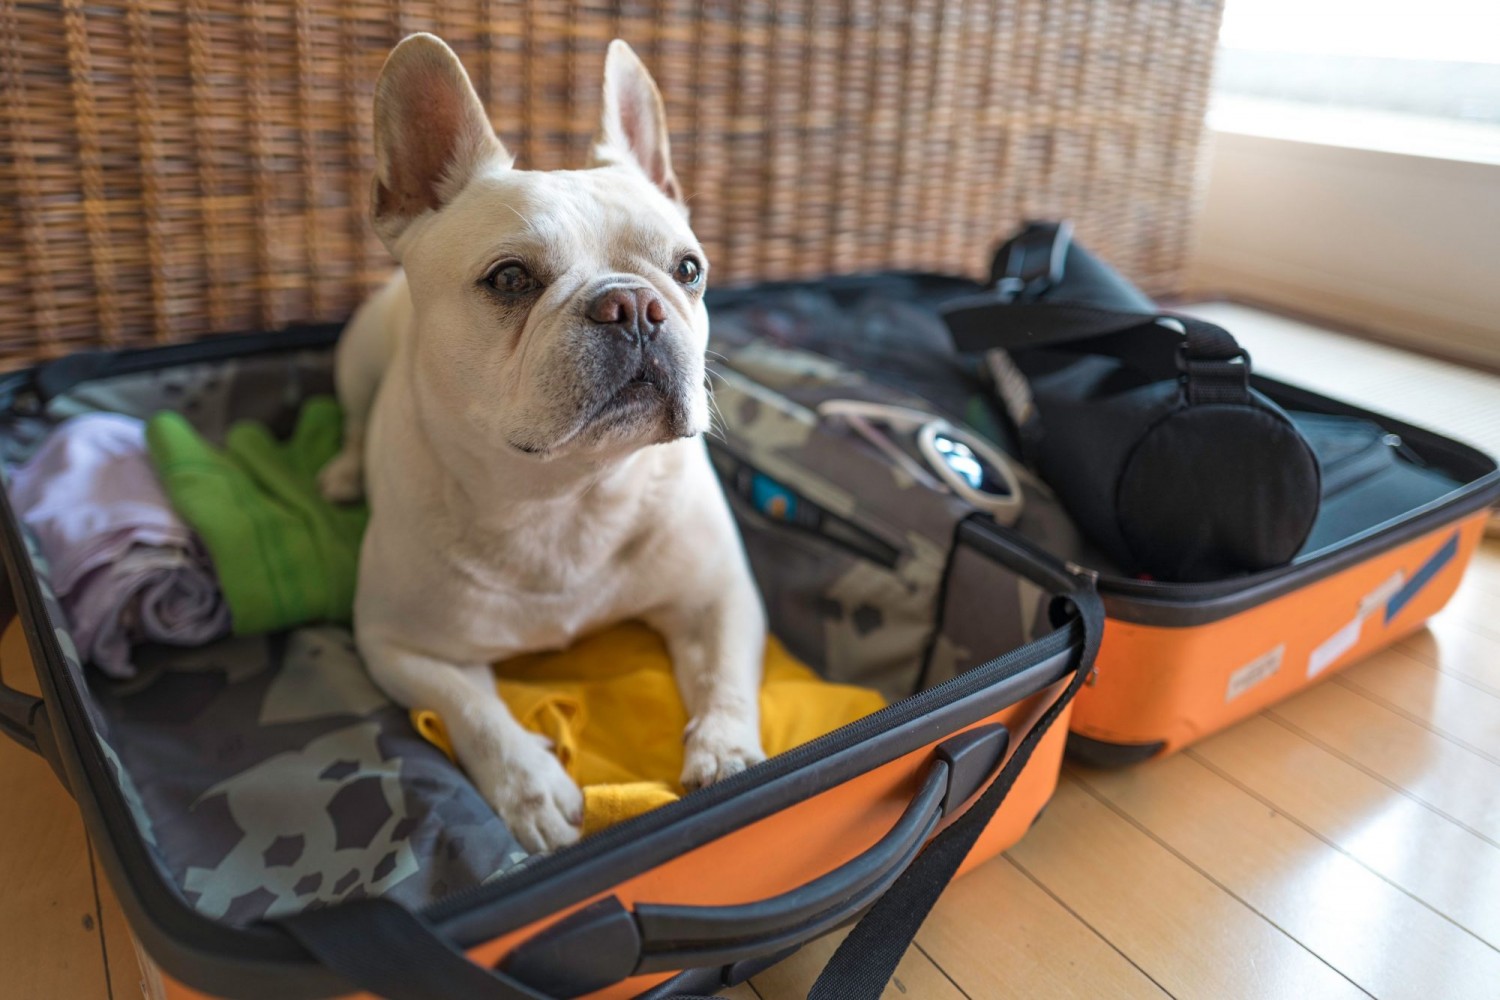 image of dog in suitcase